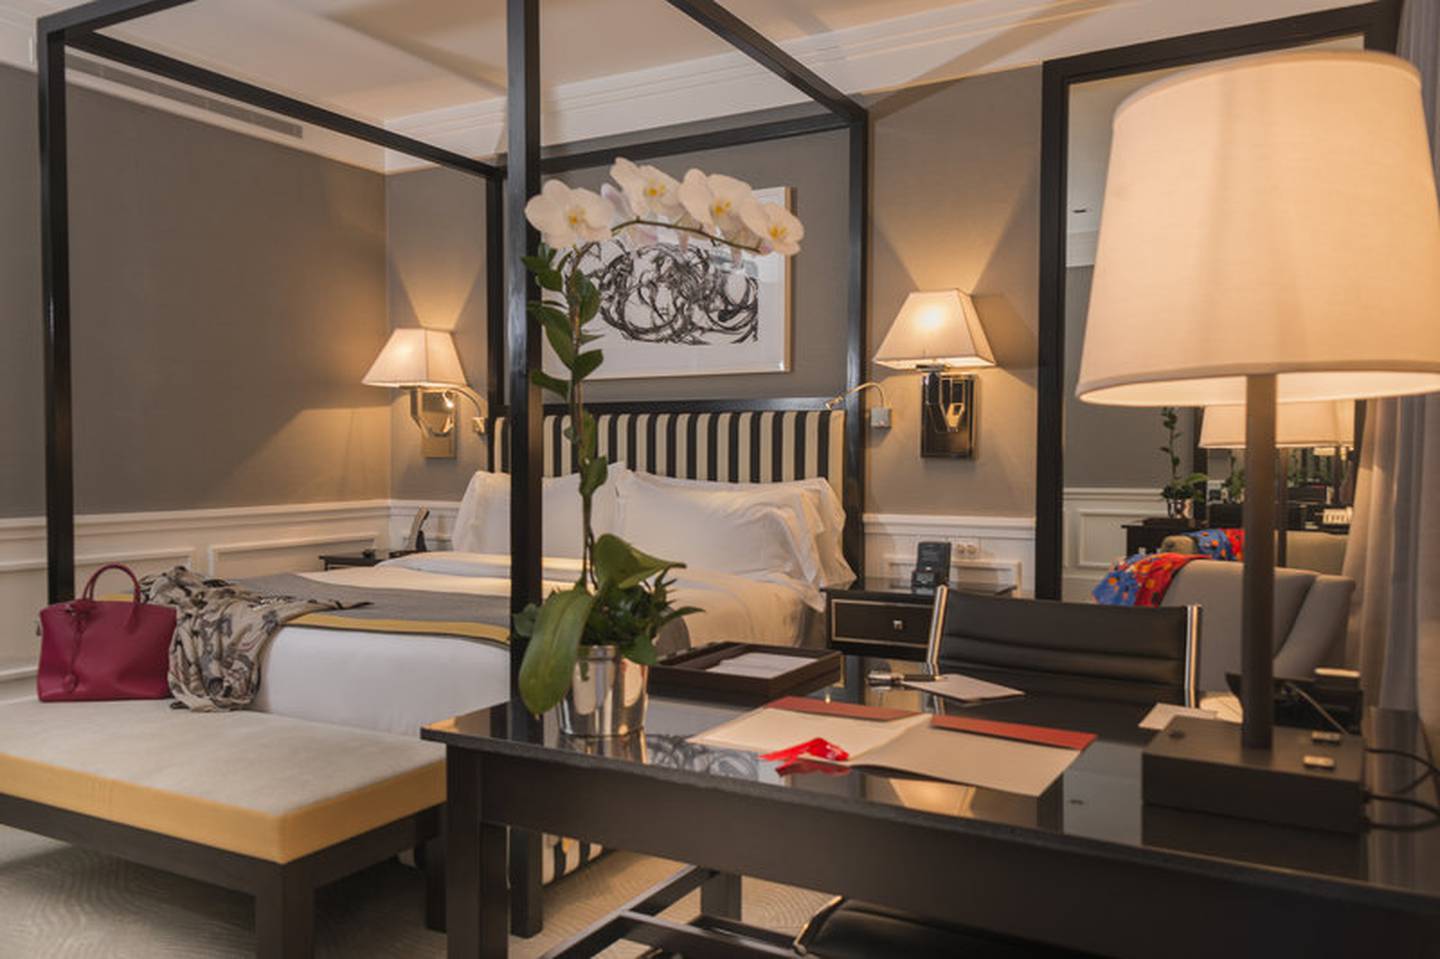 A premium deluxe room with a king-size bed is one of the priciest rooms on offer in La Castellana neighborhood / Photo Hotel Cayena